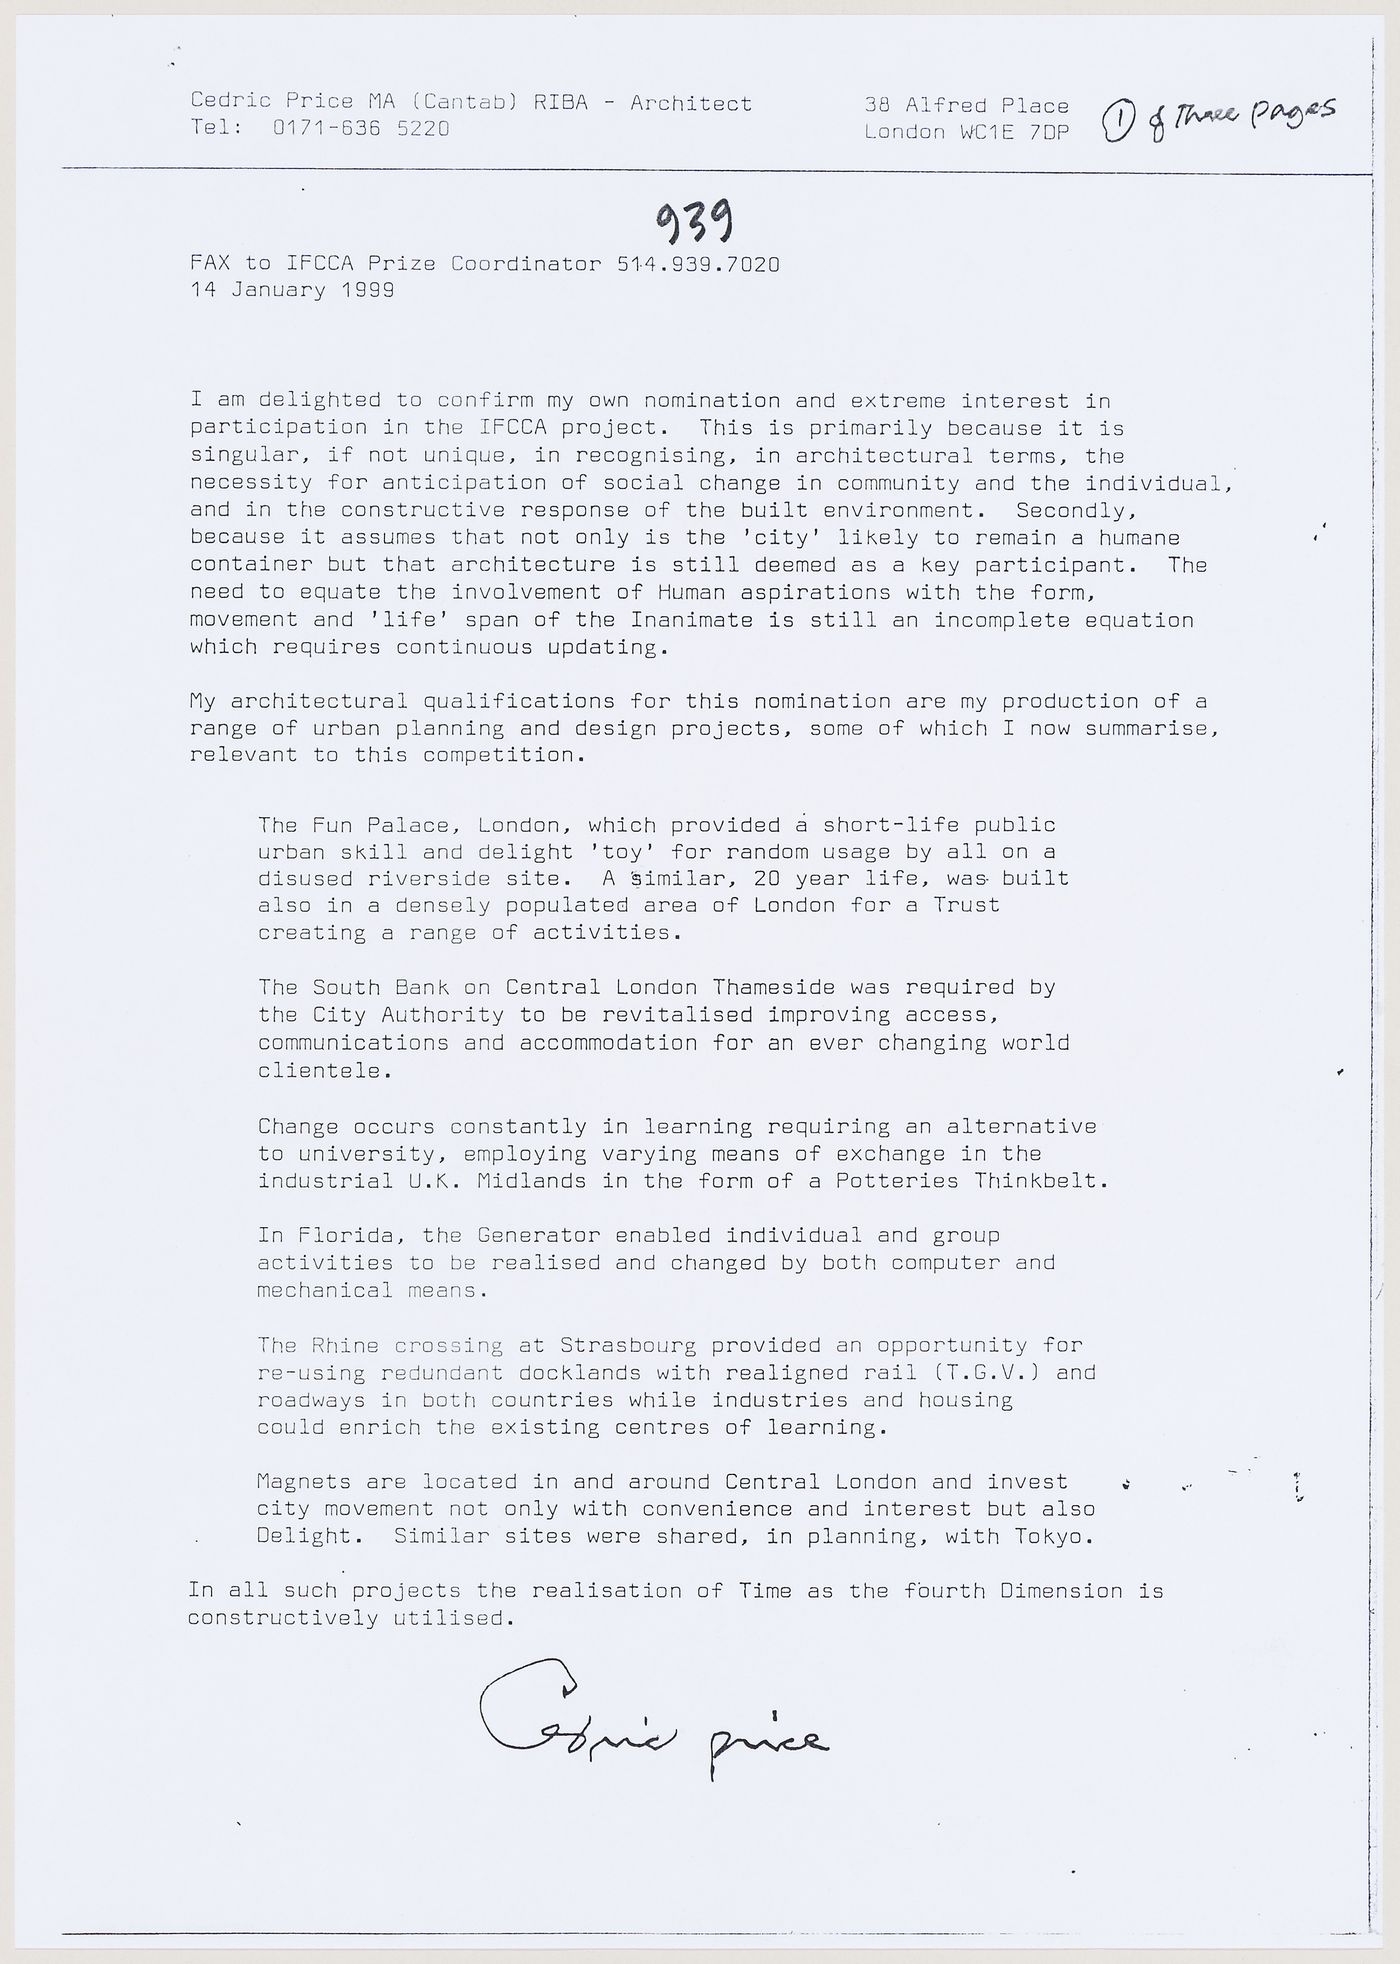 Message (fax) from Cedric Price addressed to the IFCCA Prize Coordinator (document from the IFPRI project records)